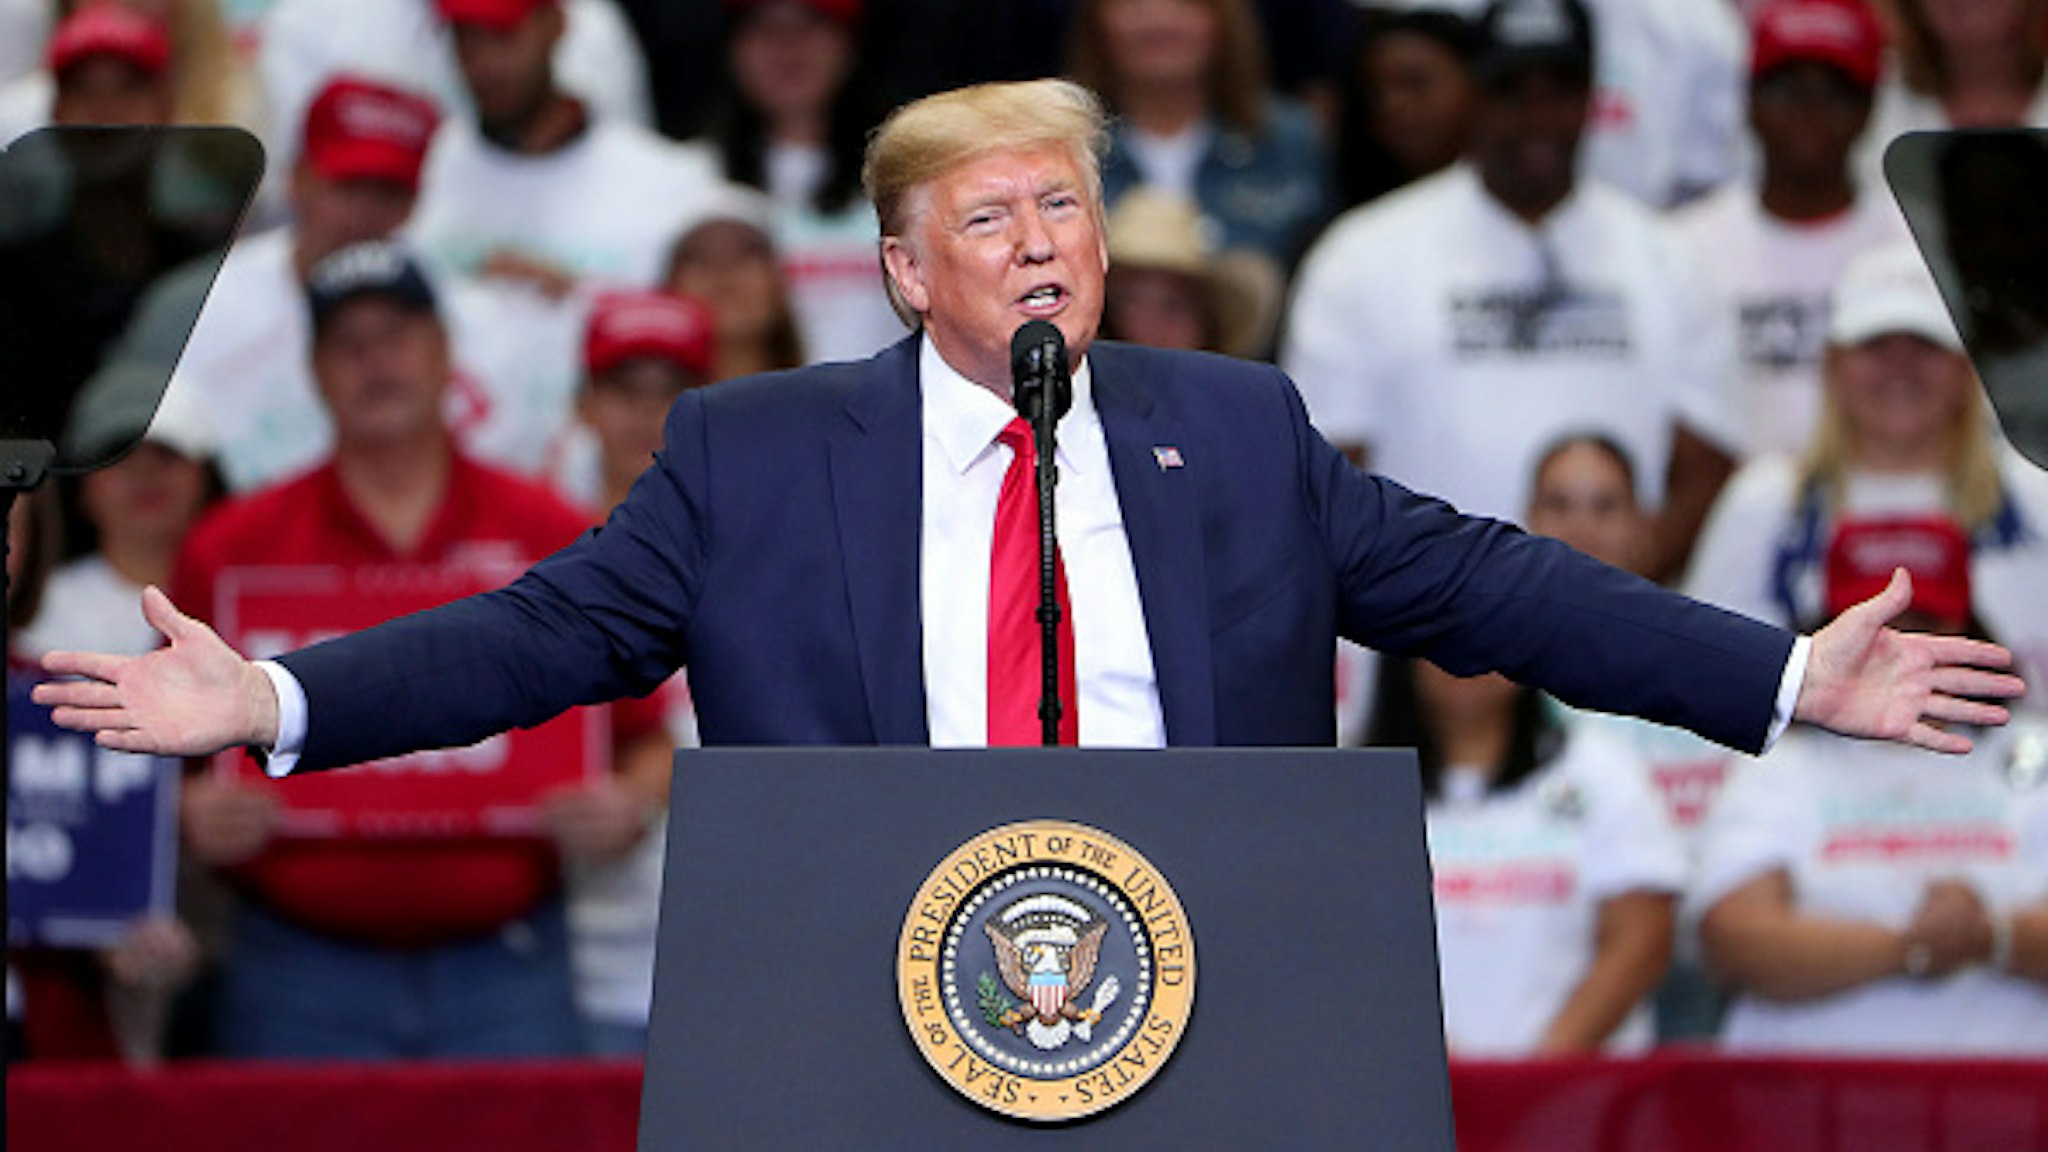 DALLAS, TEXAS - OCTOBER 17: U.S. President Donald Trump speaks during a "Keep America Great" Campaign Rally at American Airlines Center on October 17, 2019 in Dallas, Texas.